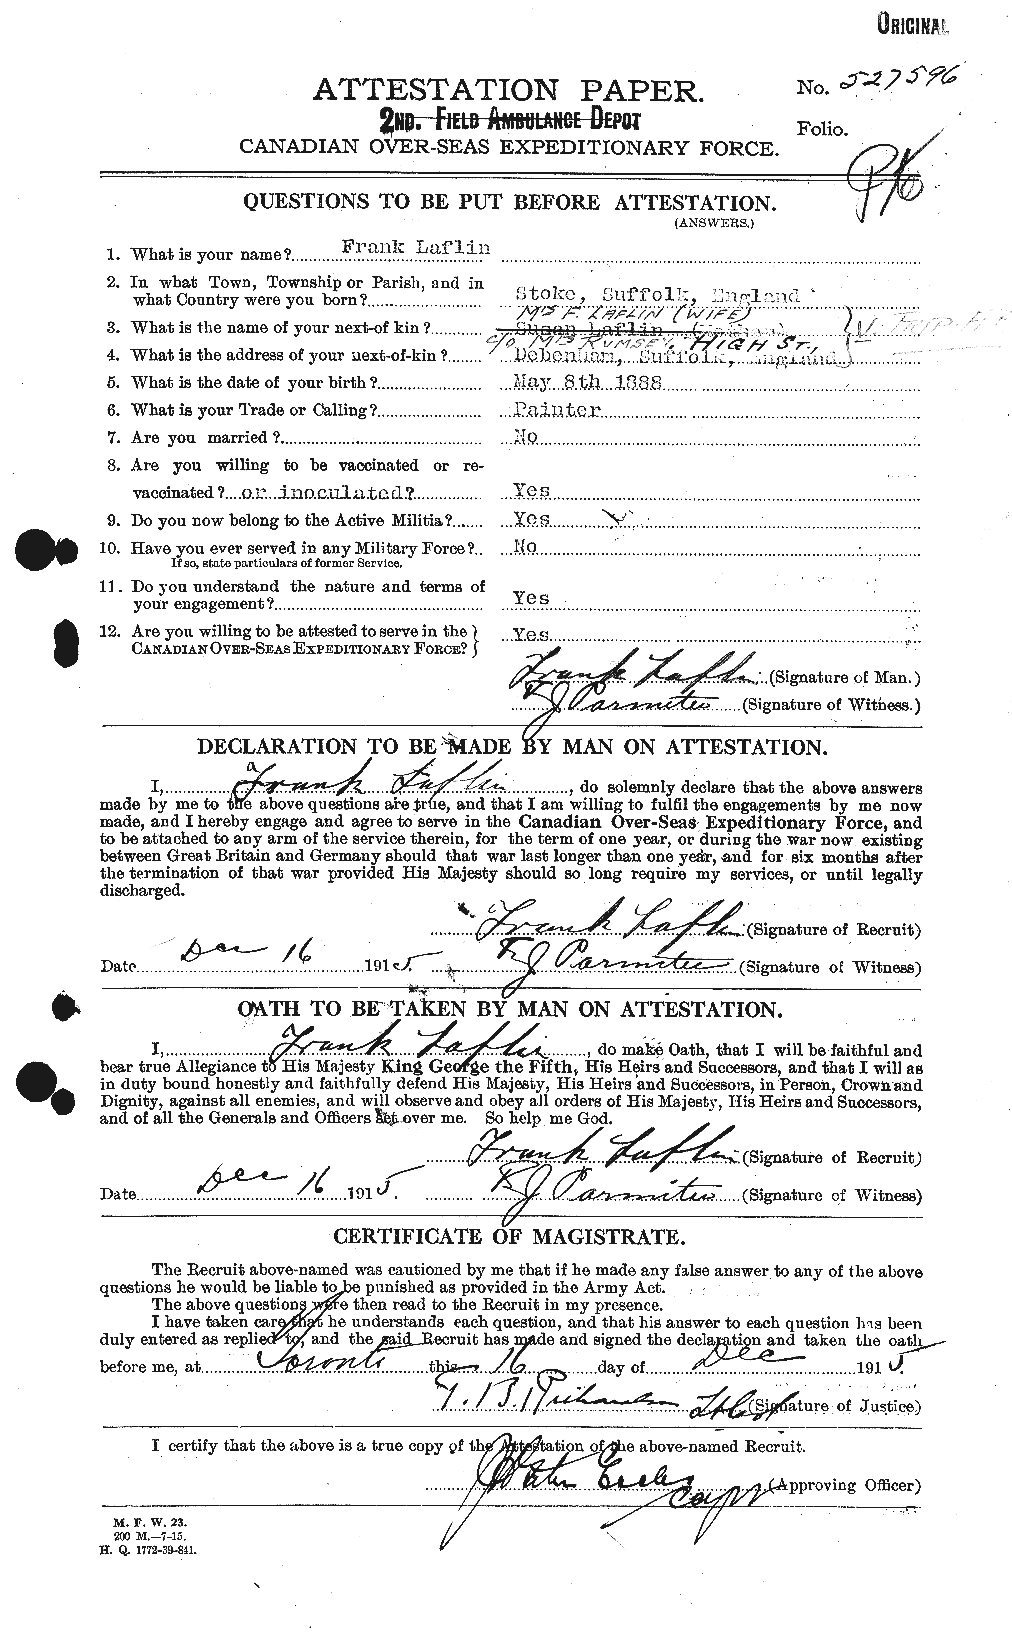 Personnel Records of the First World War - CEF 446898a